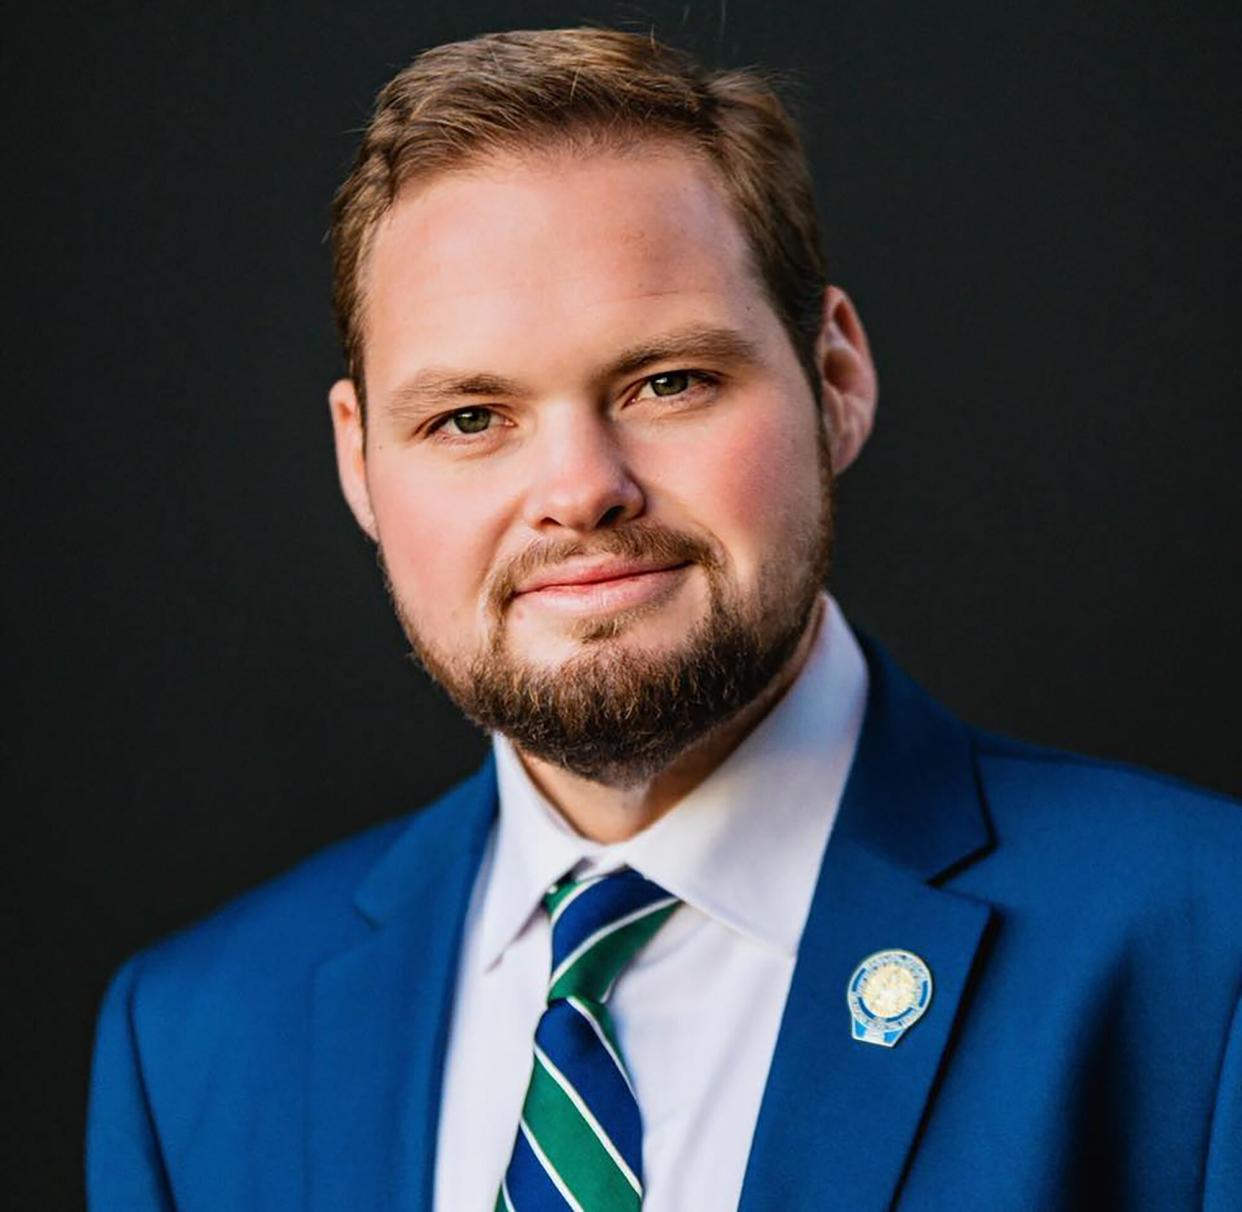 Mayor Adam Graham . Adam4TheVillage Oklahoma town's first openly gay mayor resigns, citing harassment. https://www.facebook.com/Adam4TheVillage